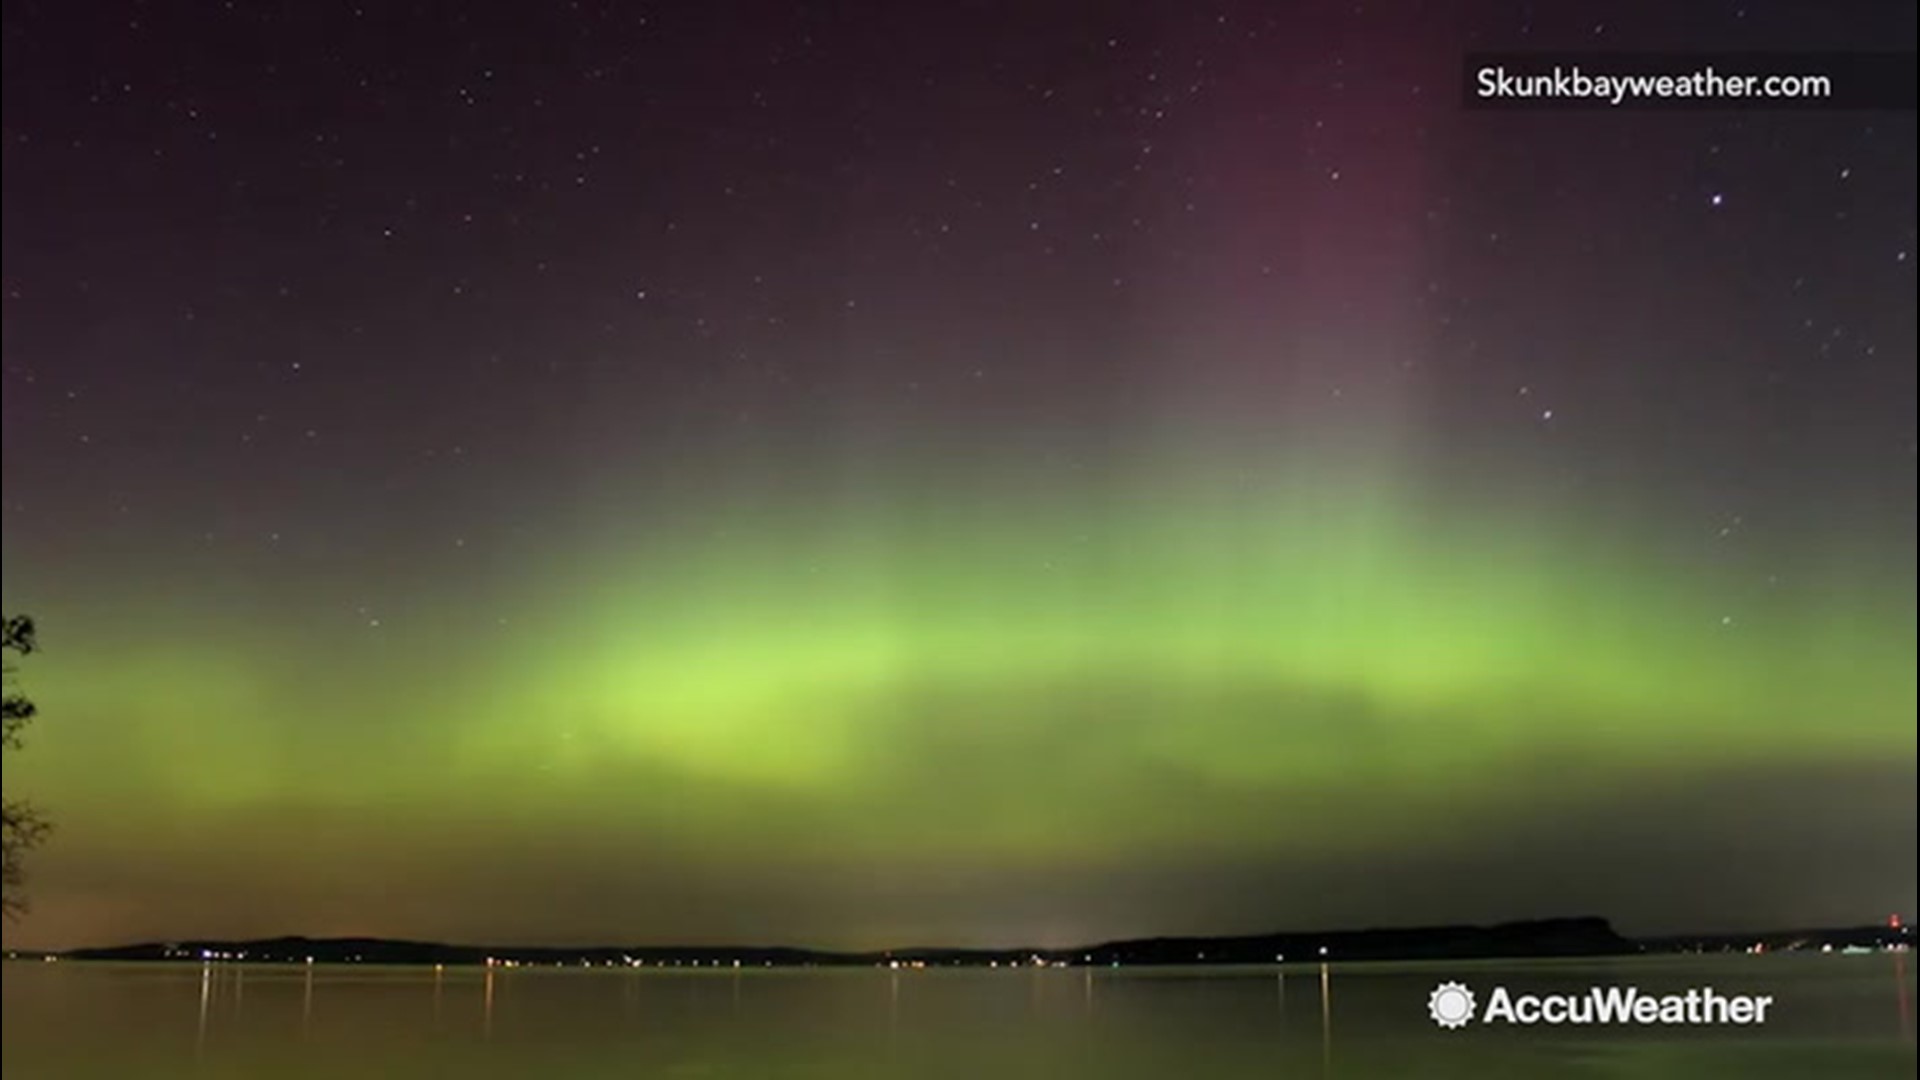 A nighttime time lapse caught a beautiful display of Northern Lights from Skunk Bay, Washington, on August 5. Aurora made a showing over high latitude locations in the Northern and Southern hemispheres.